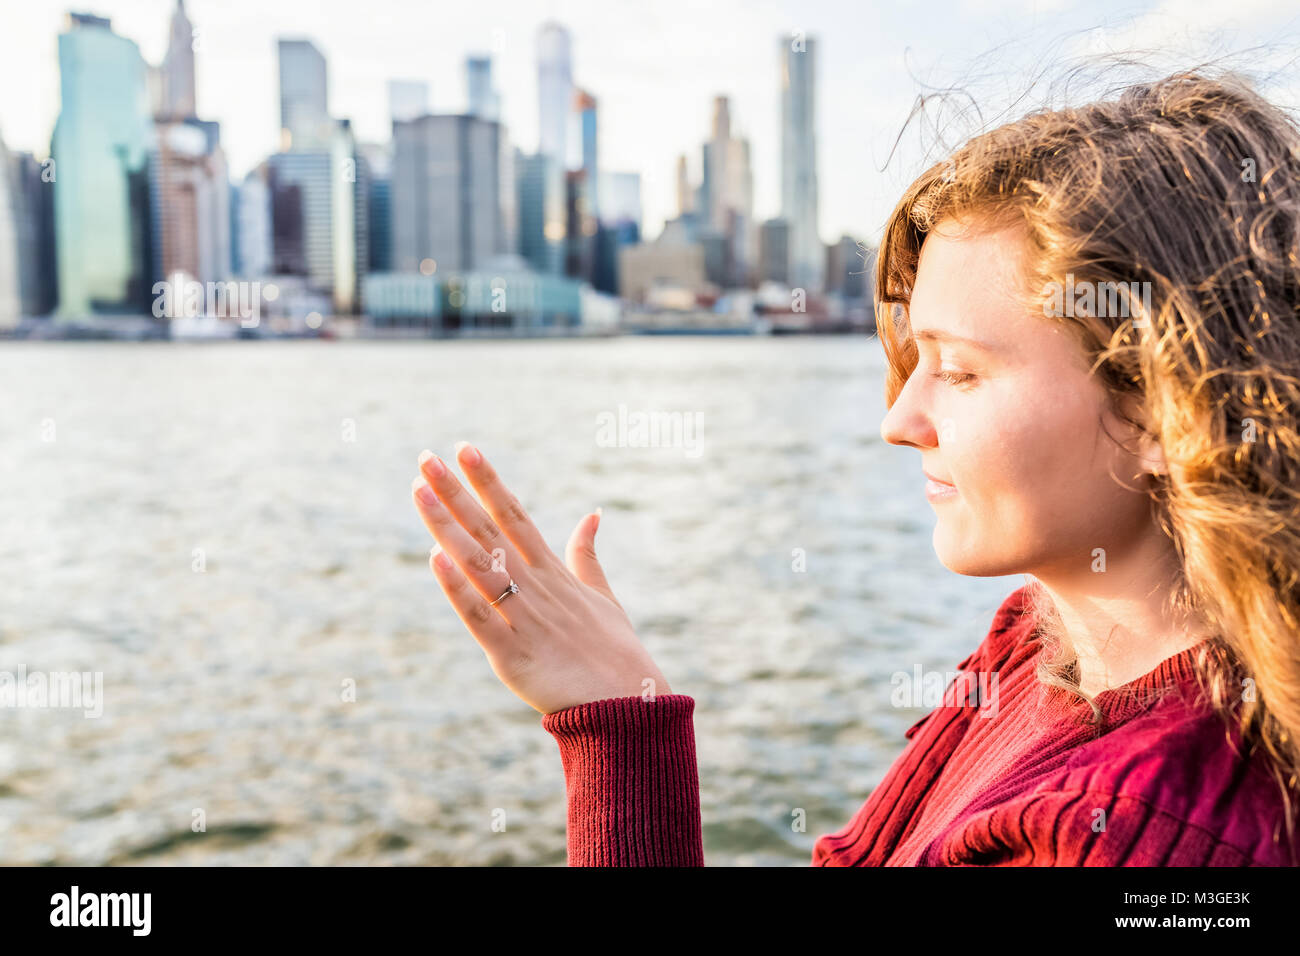 Young woman's hand with diamond engagement ring solitaire, gold wedding band outside outdoors in NYC New York City Brooklyn Bridge Park by east river, Stock Photo